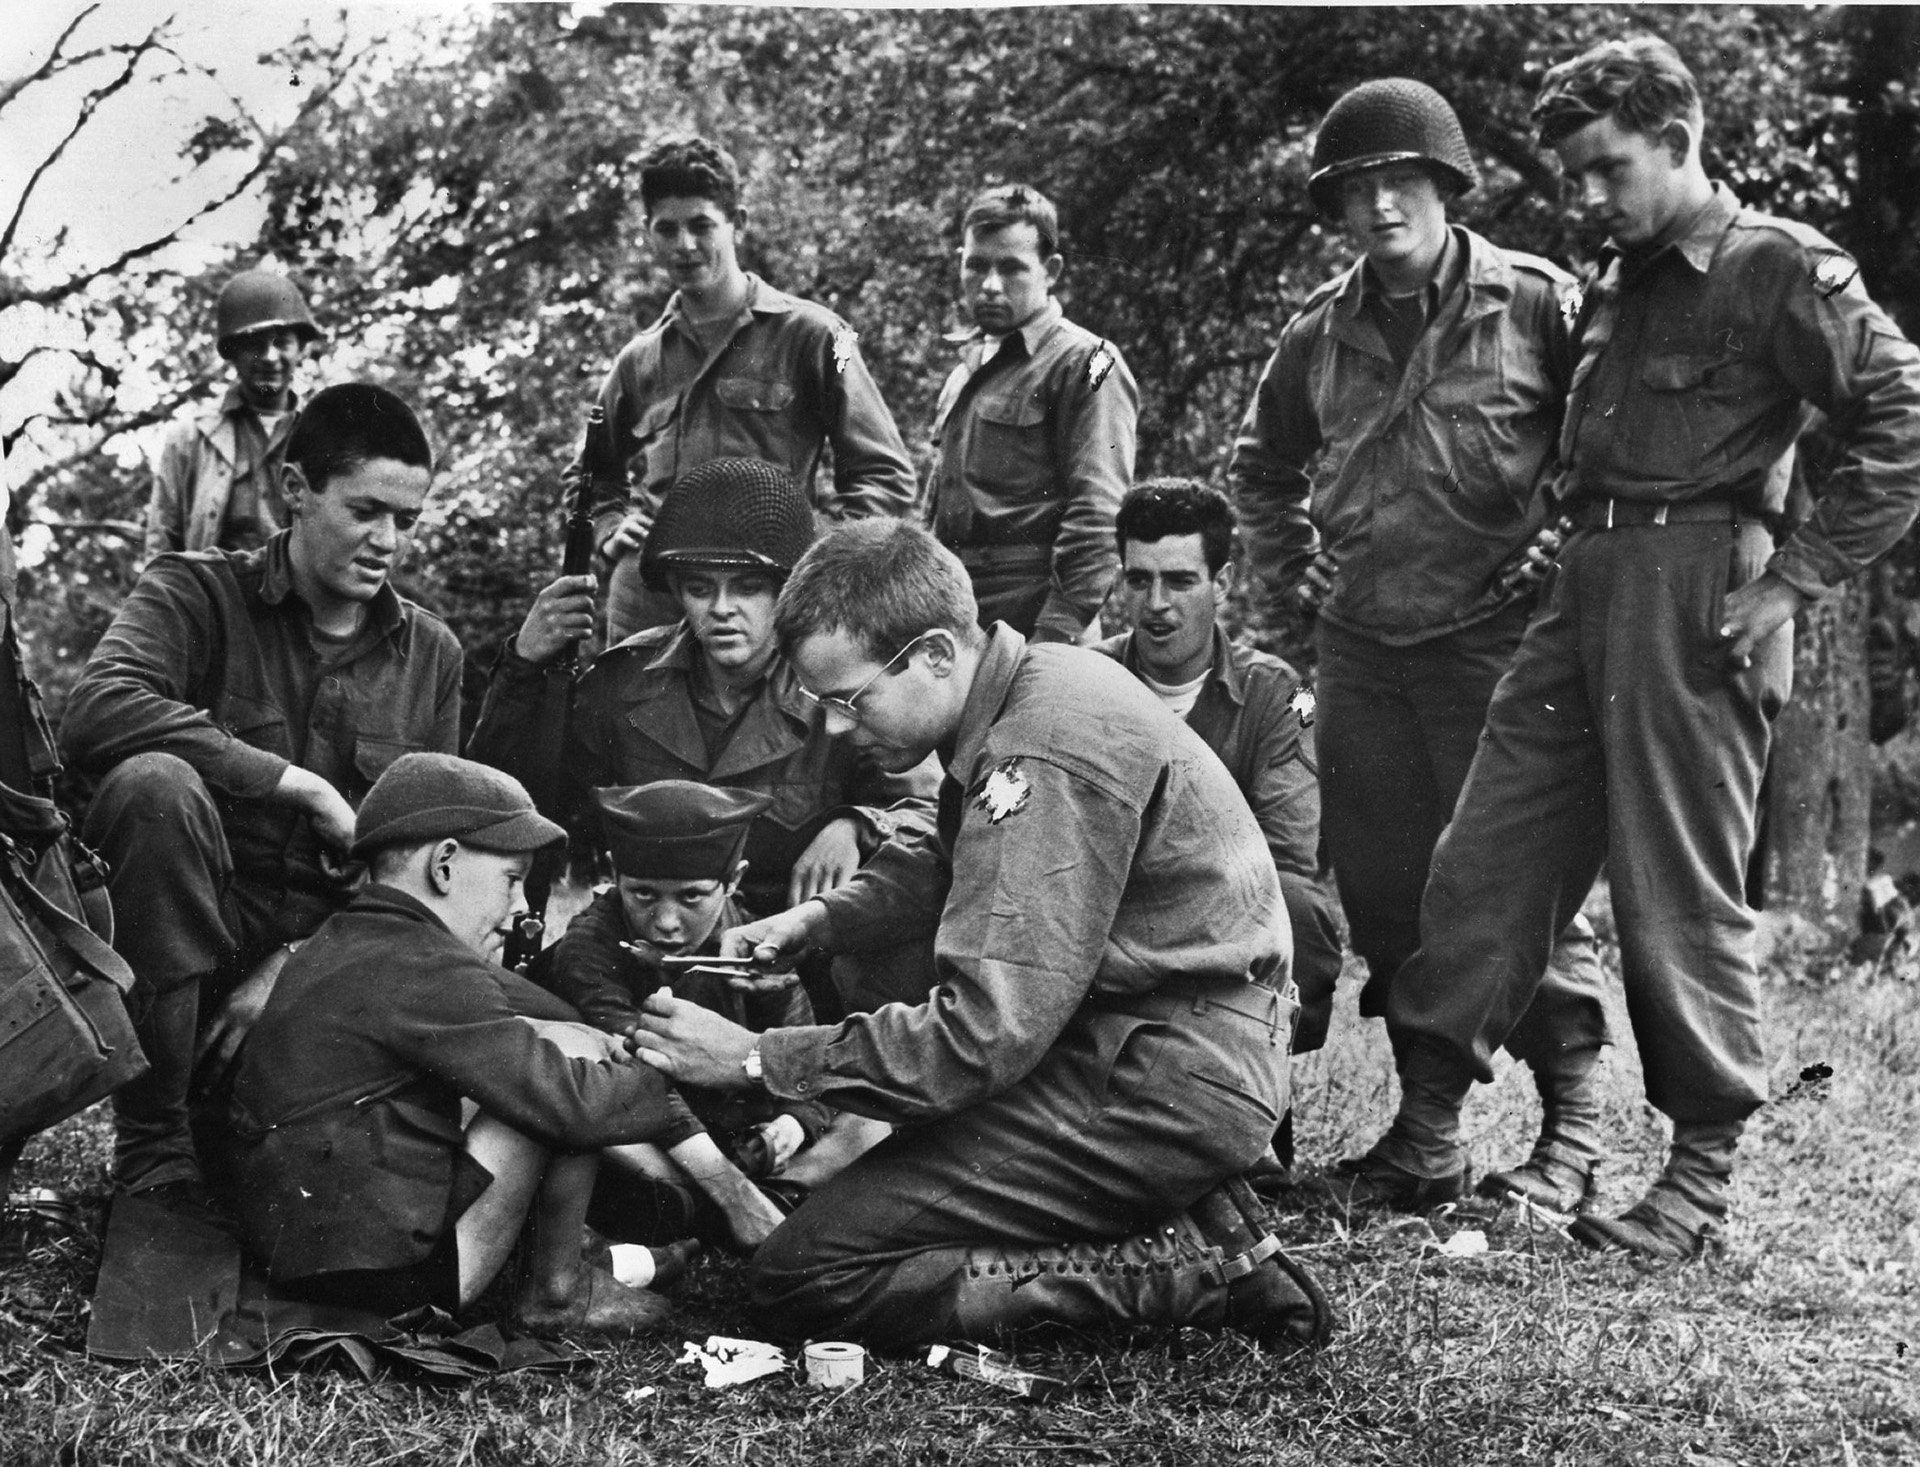 A private treats a small French boy’s hand while other soldiers watch. 